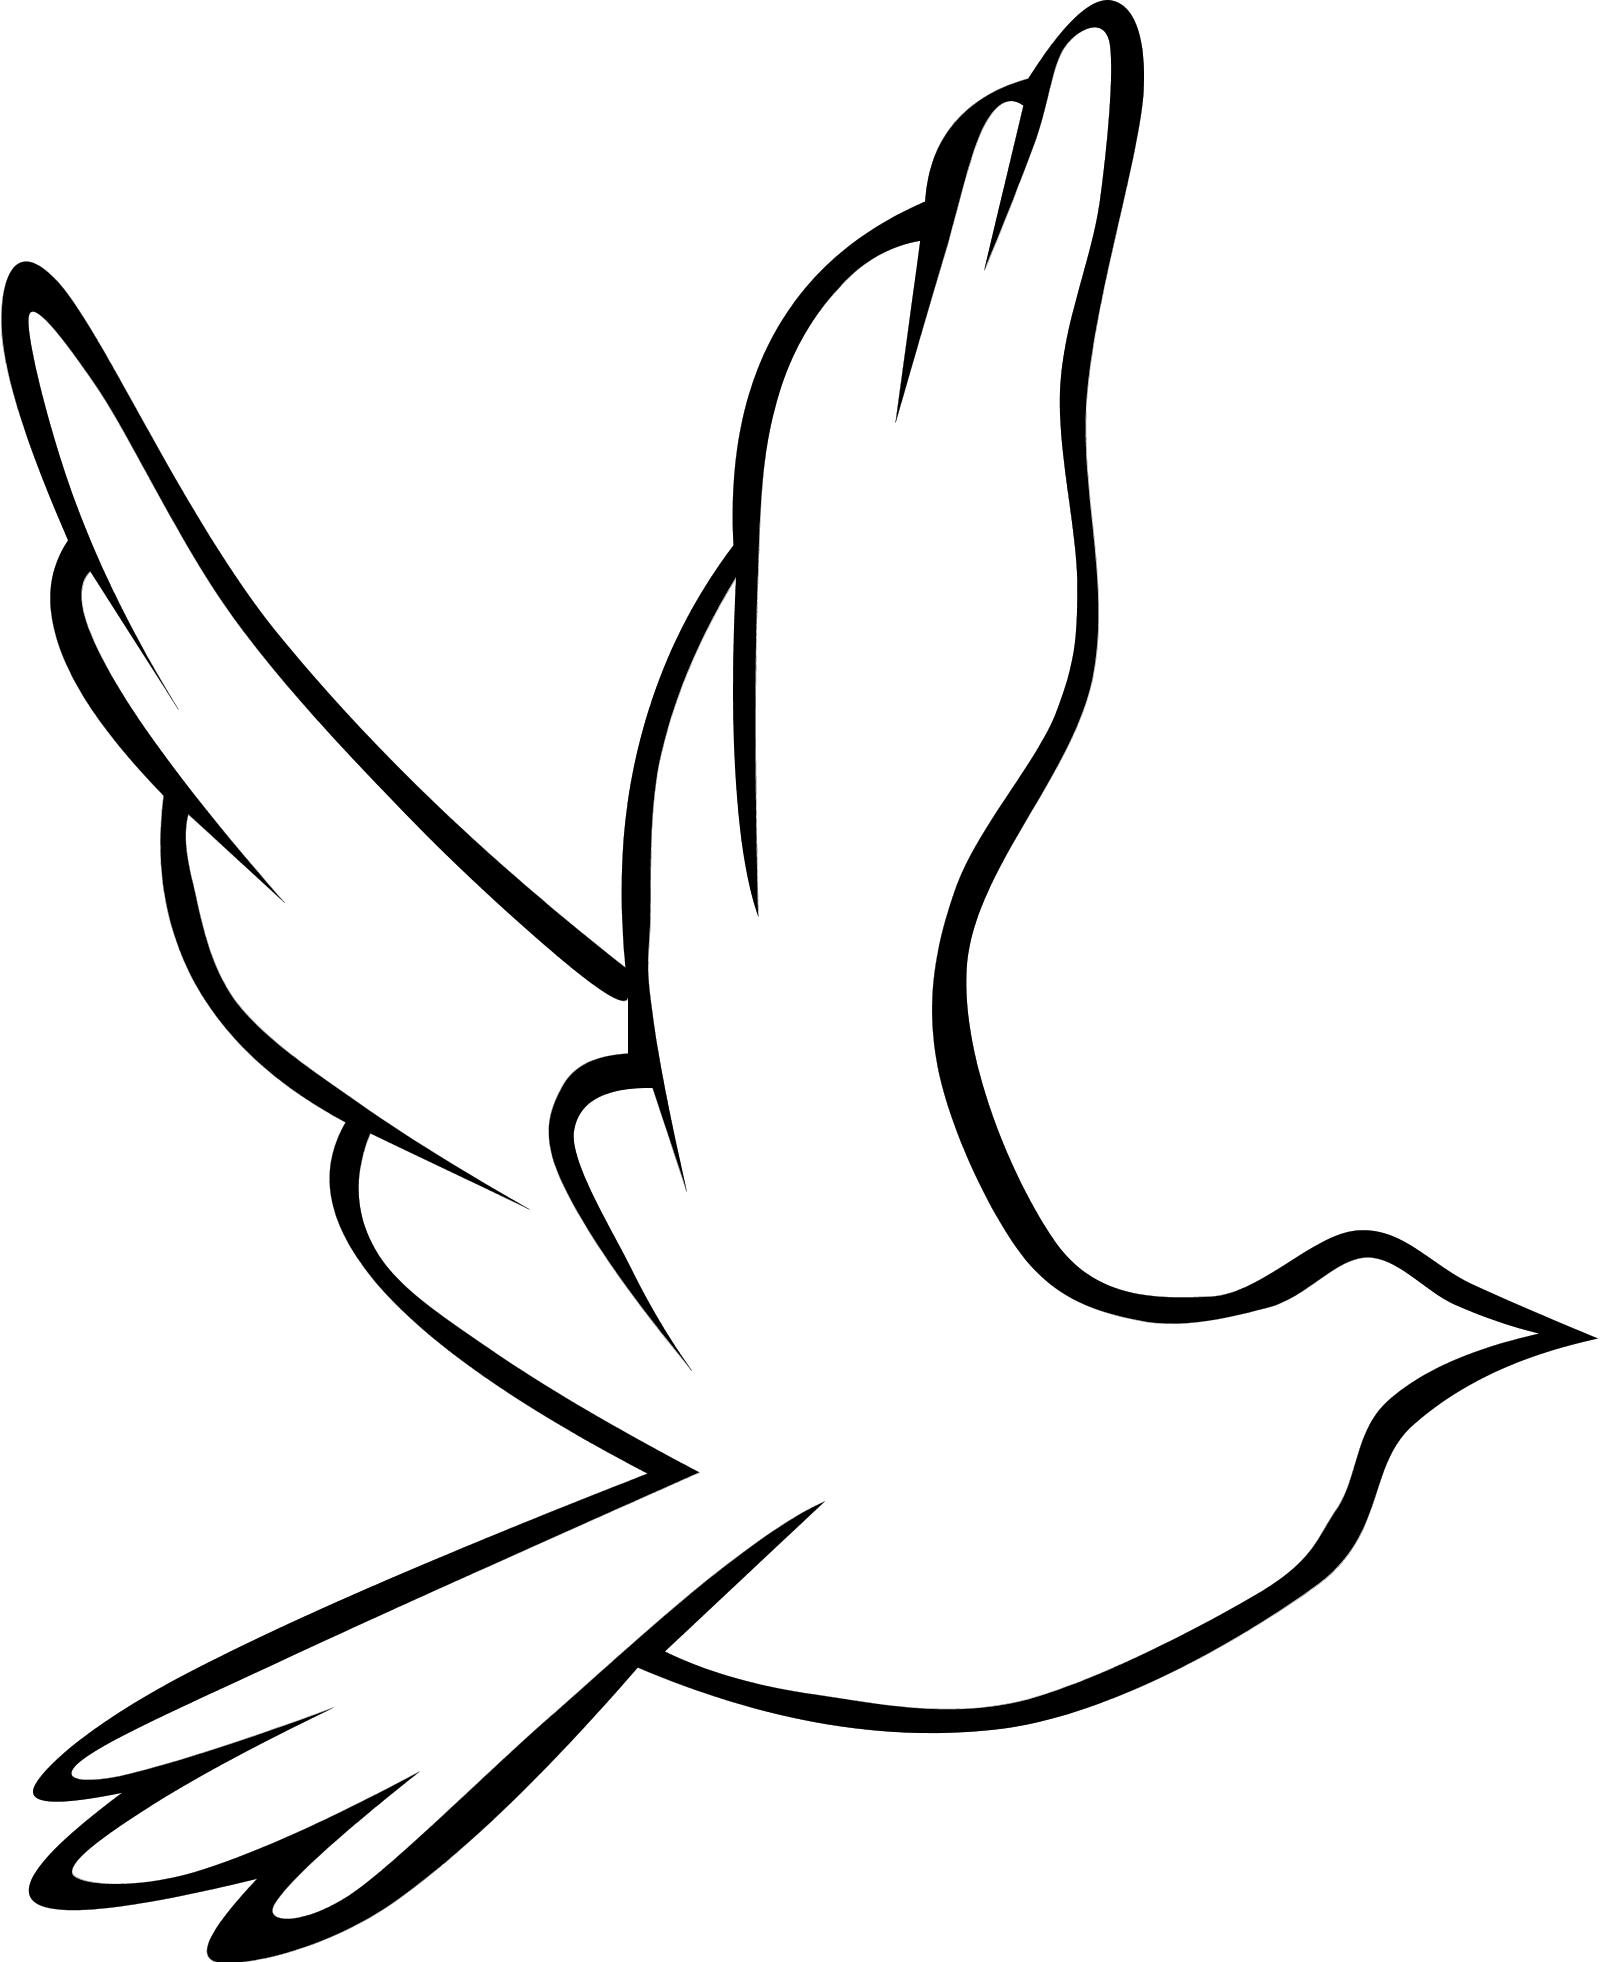 Coloring Pages Peace Signs 585 | Free Printable Coloring Pages